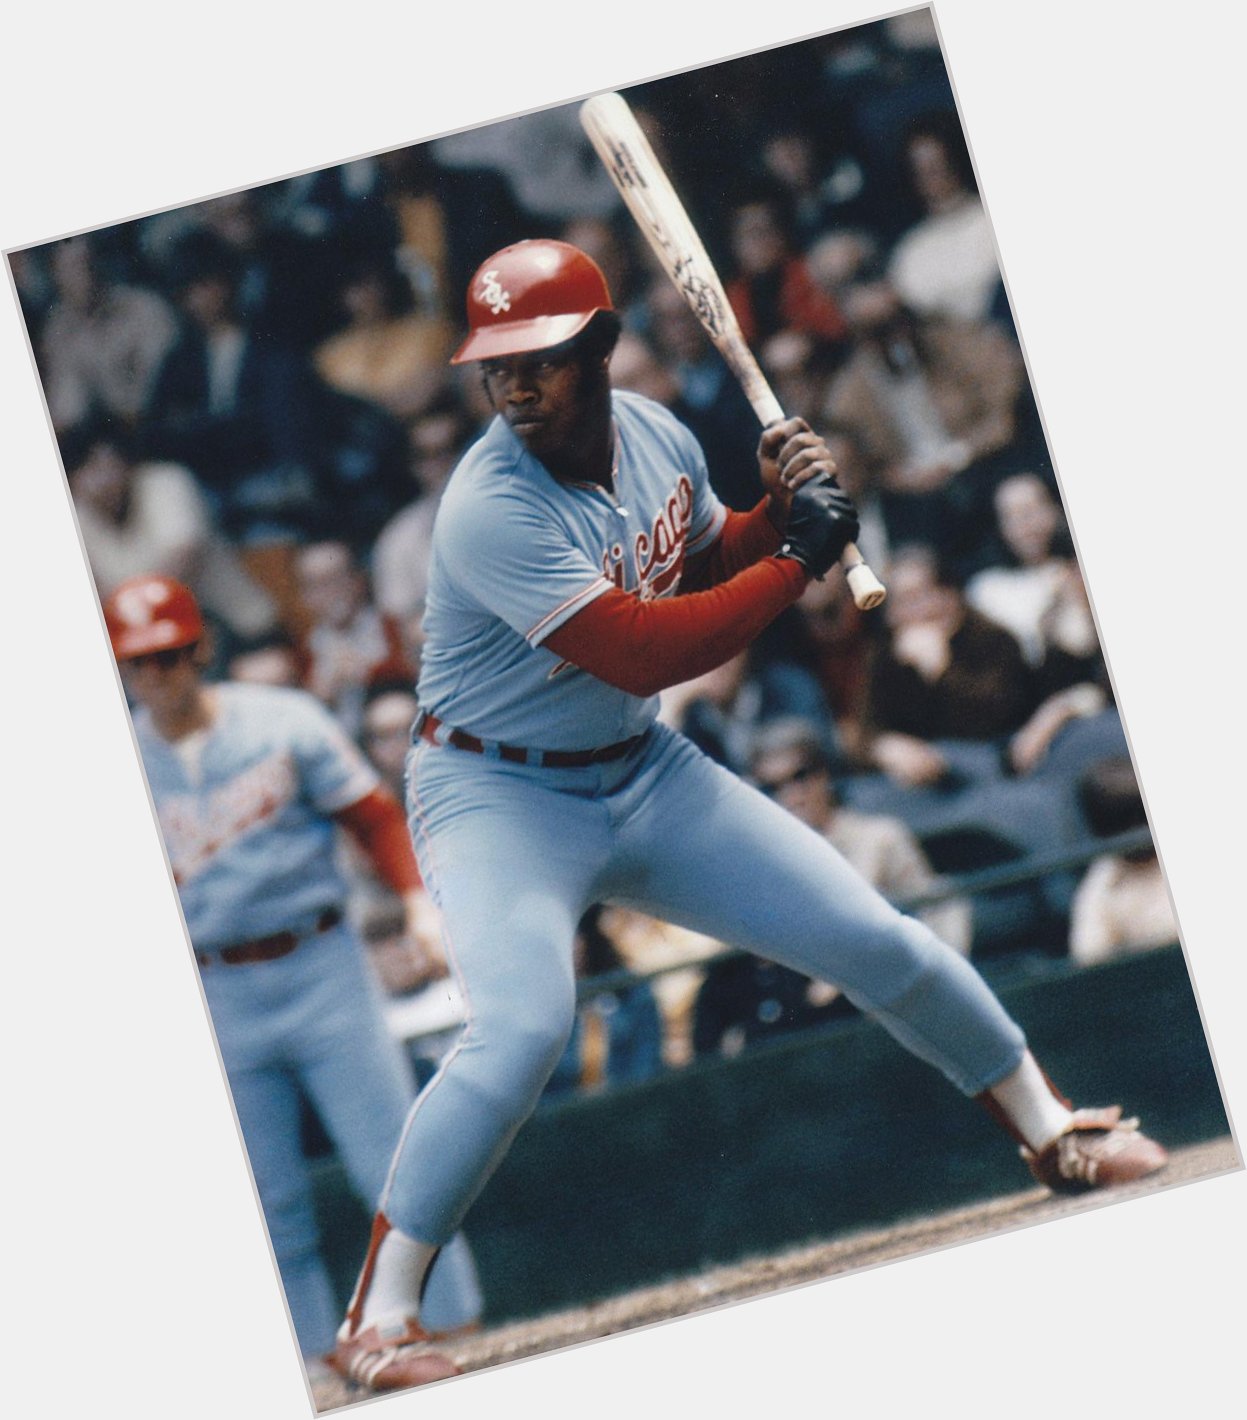 Happy 67th Birthday to former Carlos May! An OF/1B/DH 1968-1976, he hit .275 in 1002 G, 4164 PA & 3633 AB. 